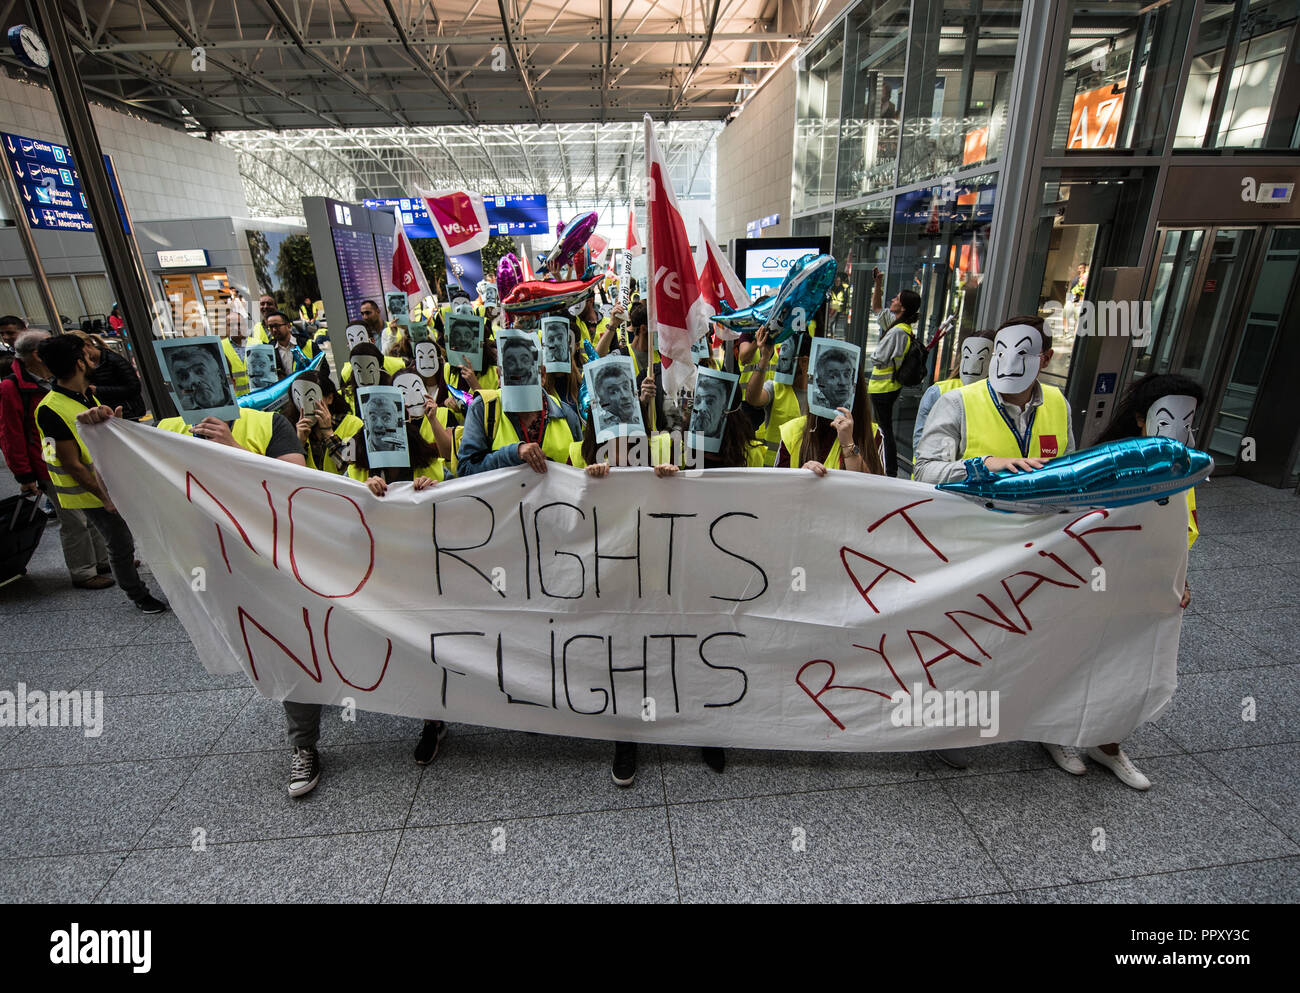 28 September 2018, Hessen, Frankfurt Main: Flight attendants of low-cost airline Ryanair demonstrate with a strike banner and masks in Terminal 2 of Frankfurt Airport. Trade unions in several European countries have called for strikes at the low-cost airline. In Germany, the pilots of the Cockpit Association (VC) and the flight attendants organized by Verdi participate. Photo: Andreas Arnold/dpa Stock Photo